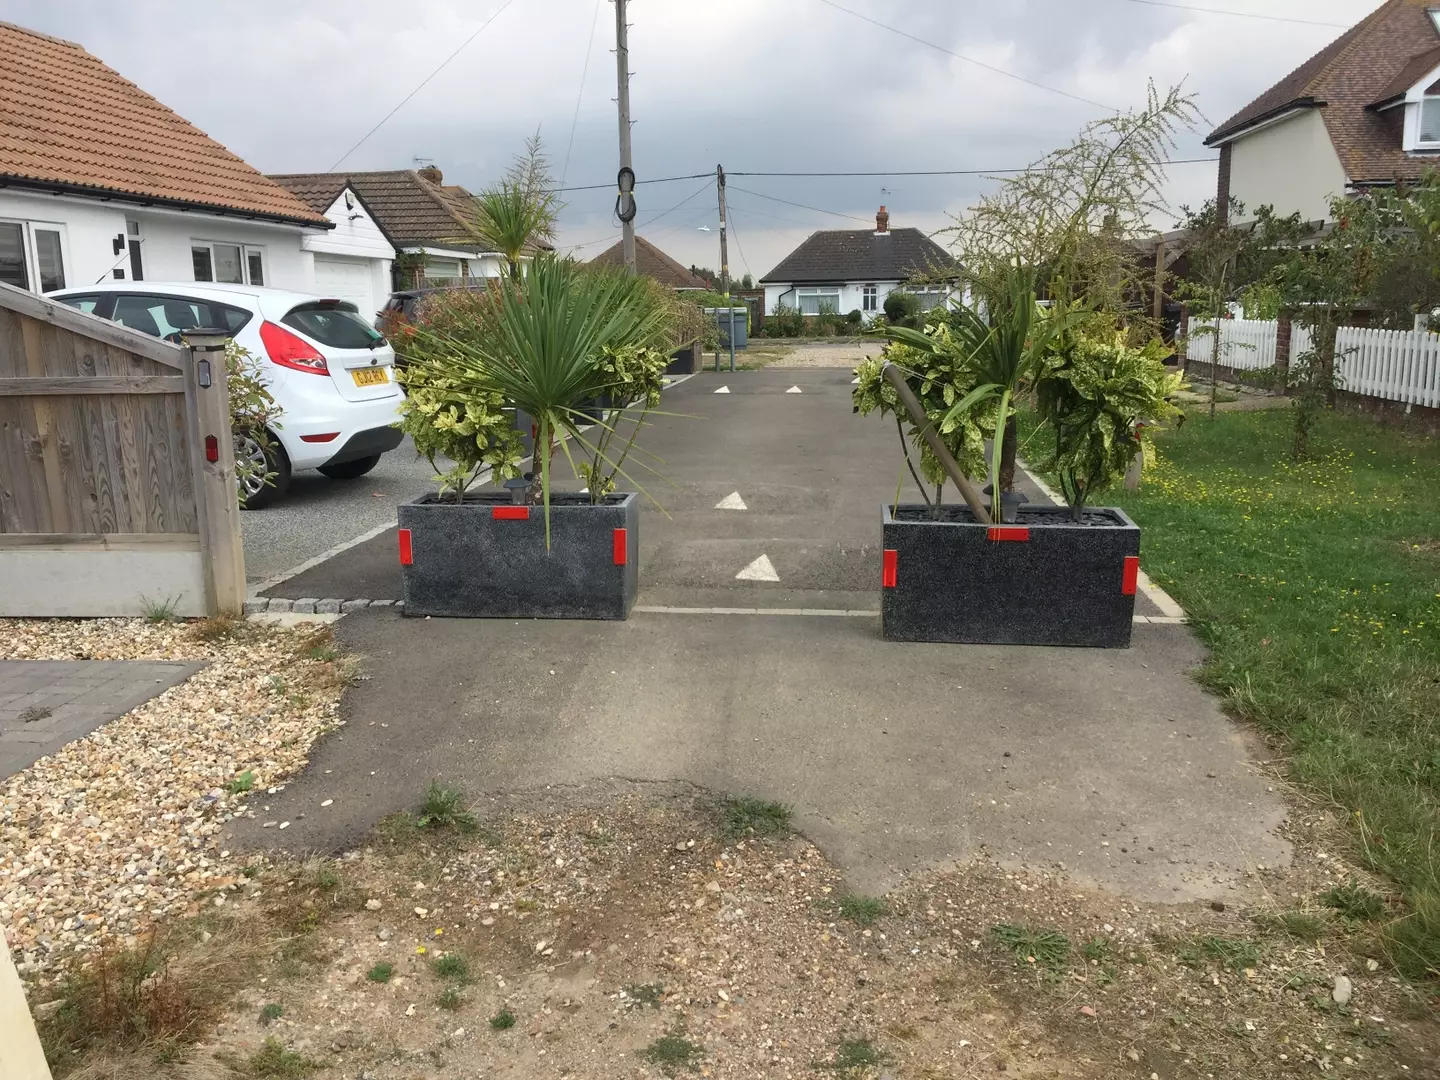 While the speed bumps didn't end up doing the trick, sticking a couple of big planters directly in the road worked.